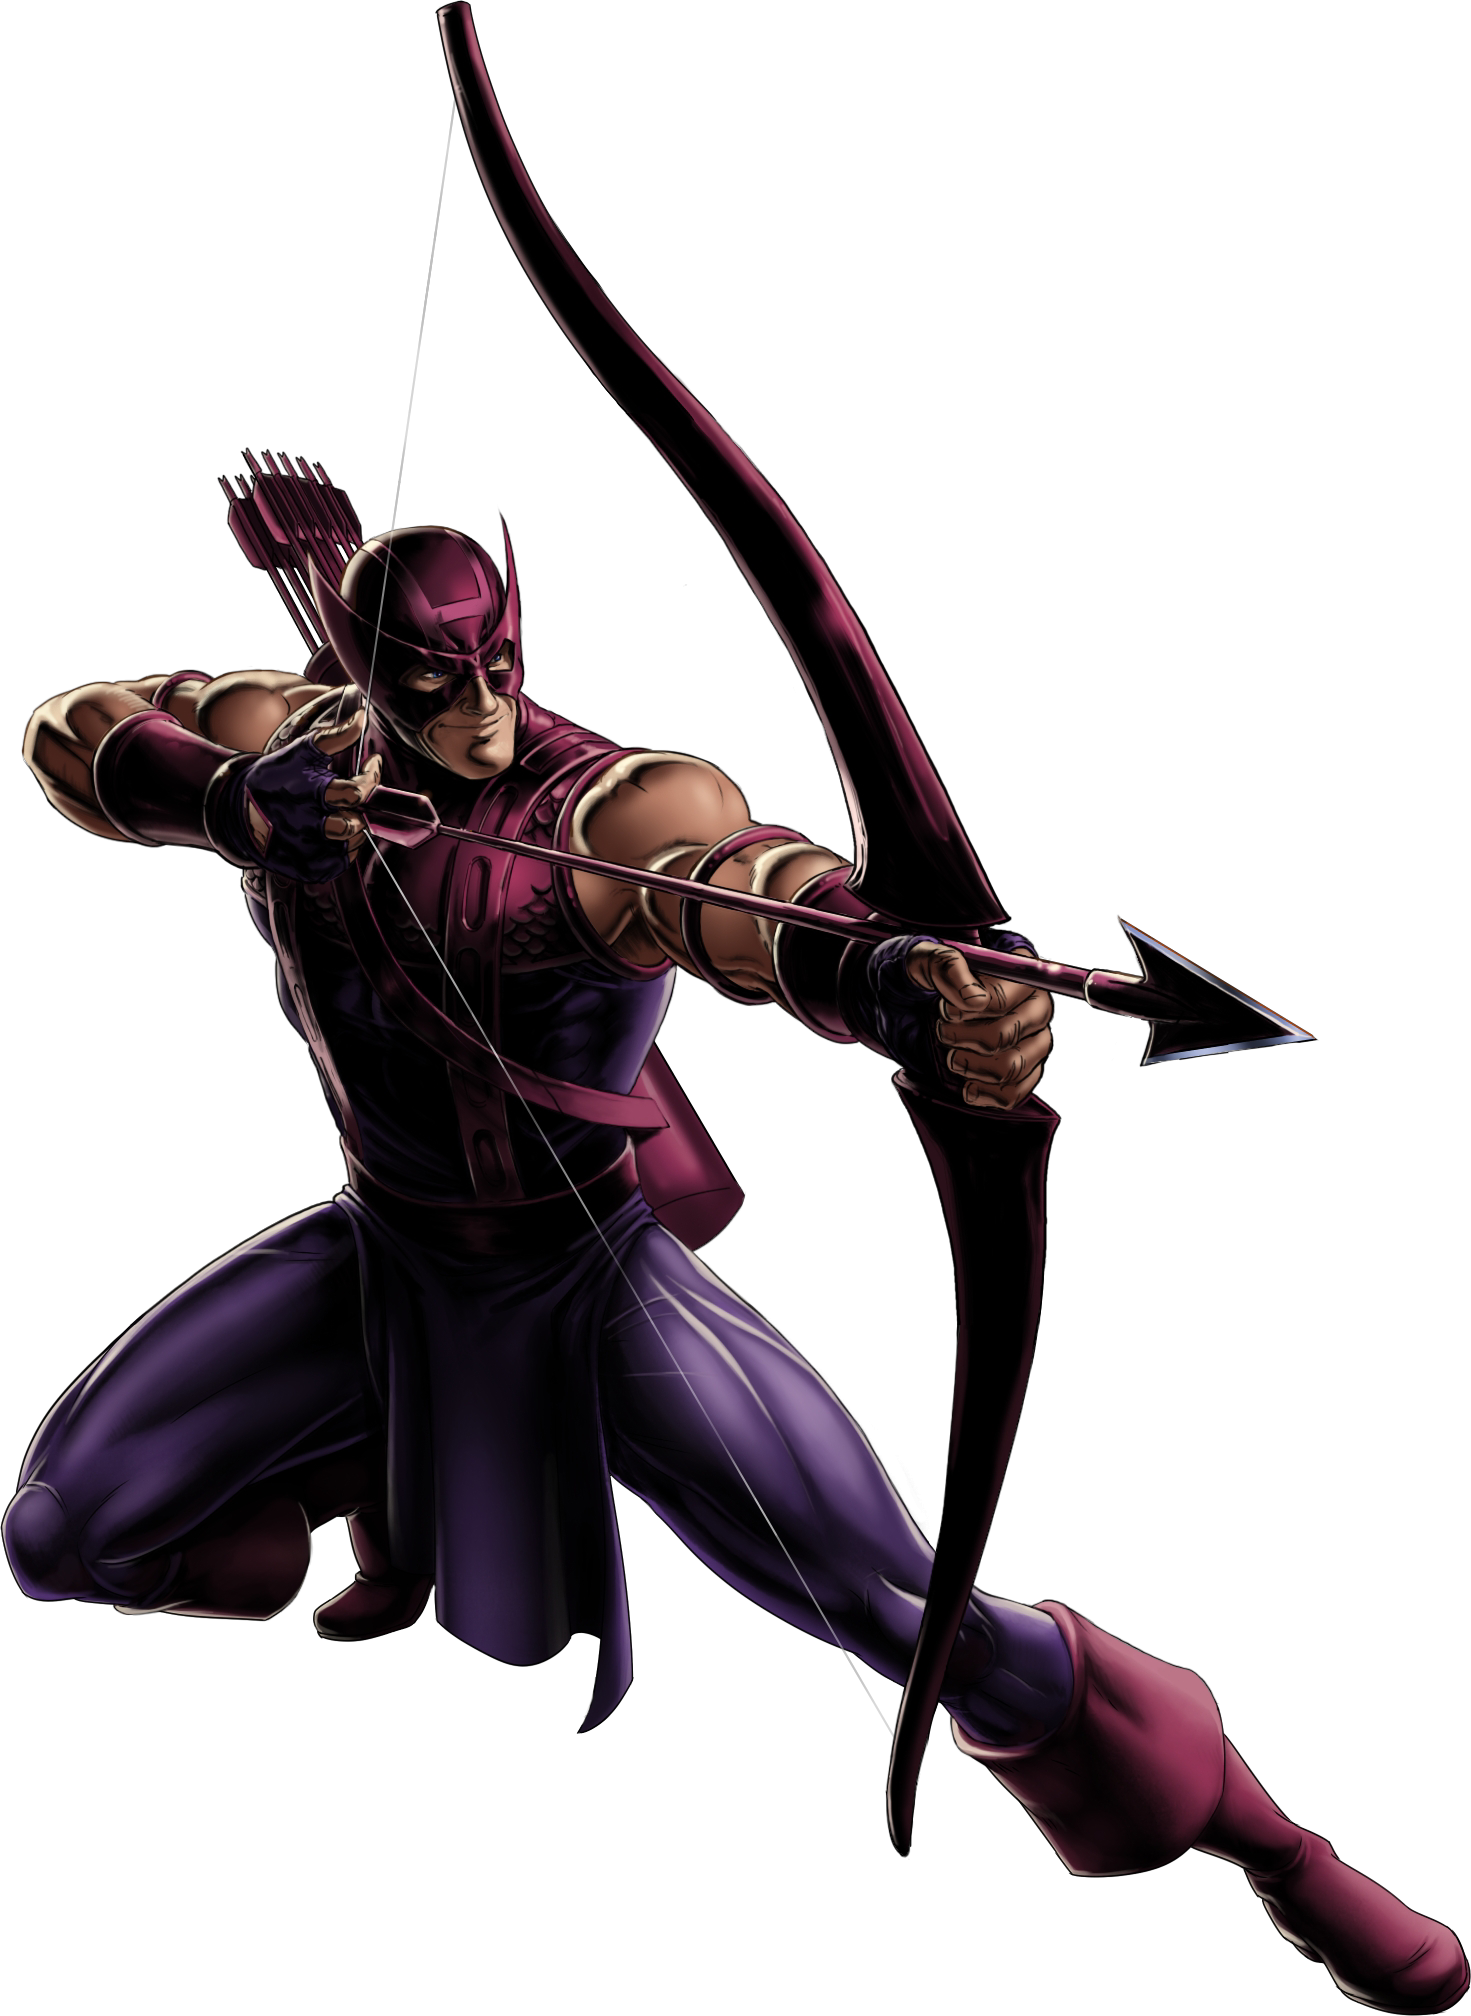 Png File Name: Hawkeye Transparent Background - Hawkeye, Transparent background PNG HD thumbnail